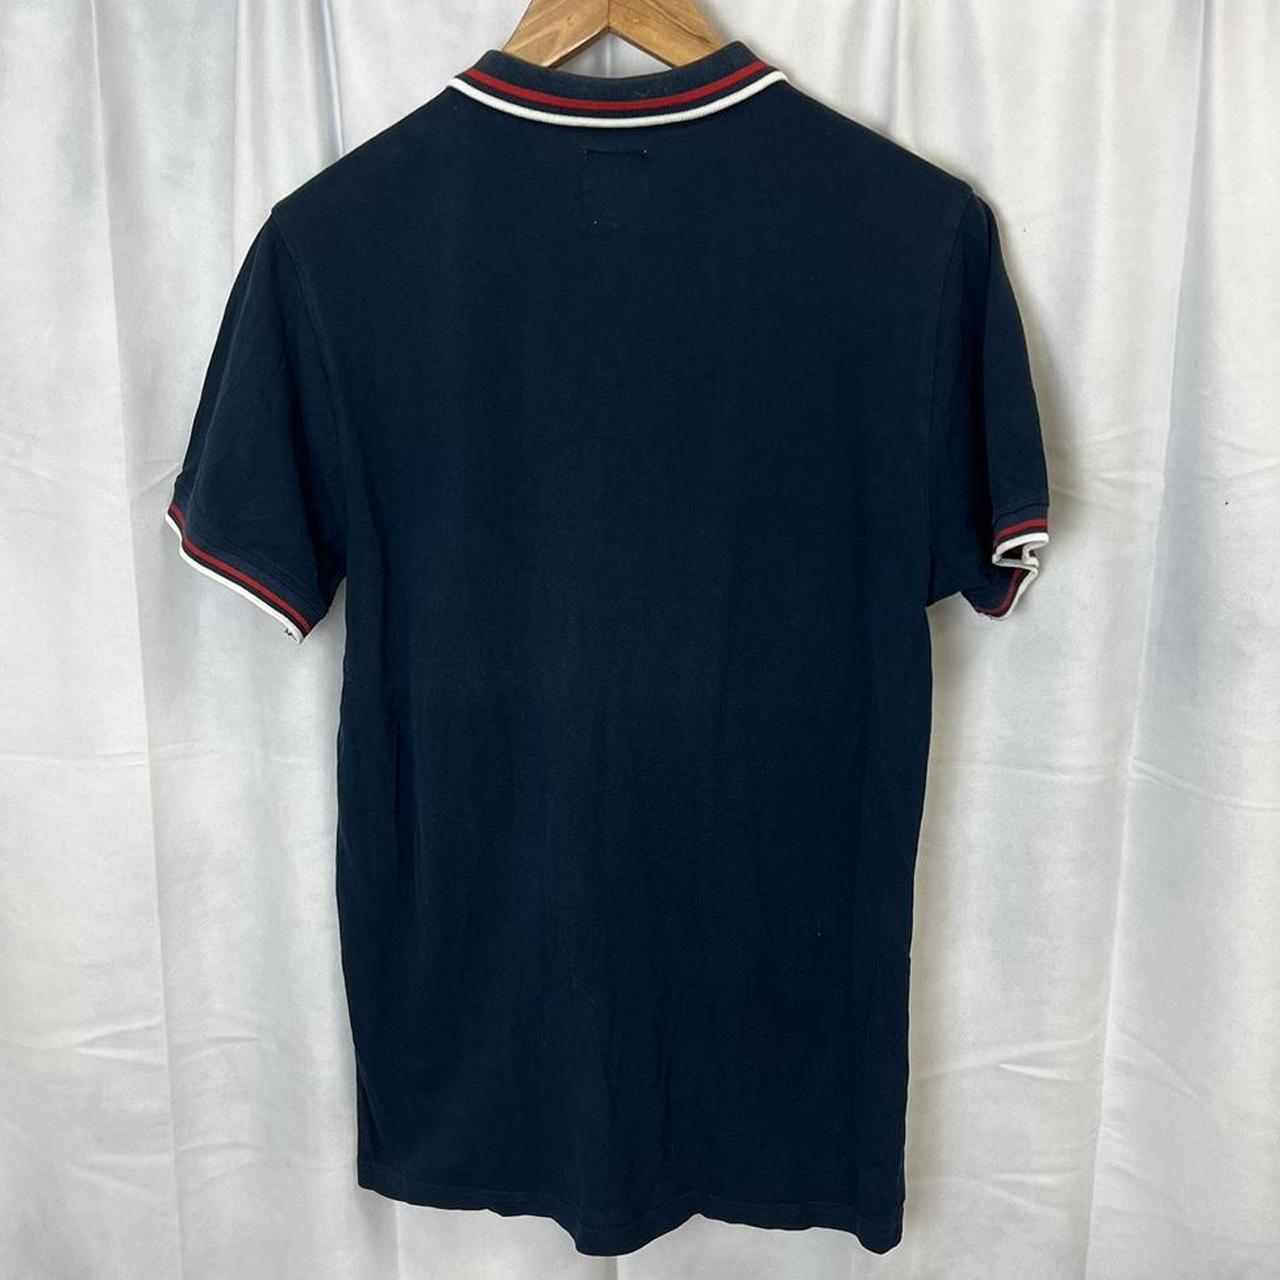 Kappa Men's Navy and Red Polo-shirts | Depop